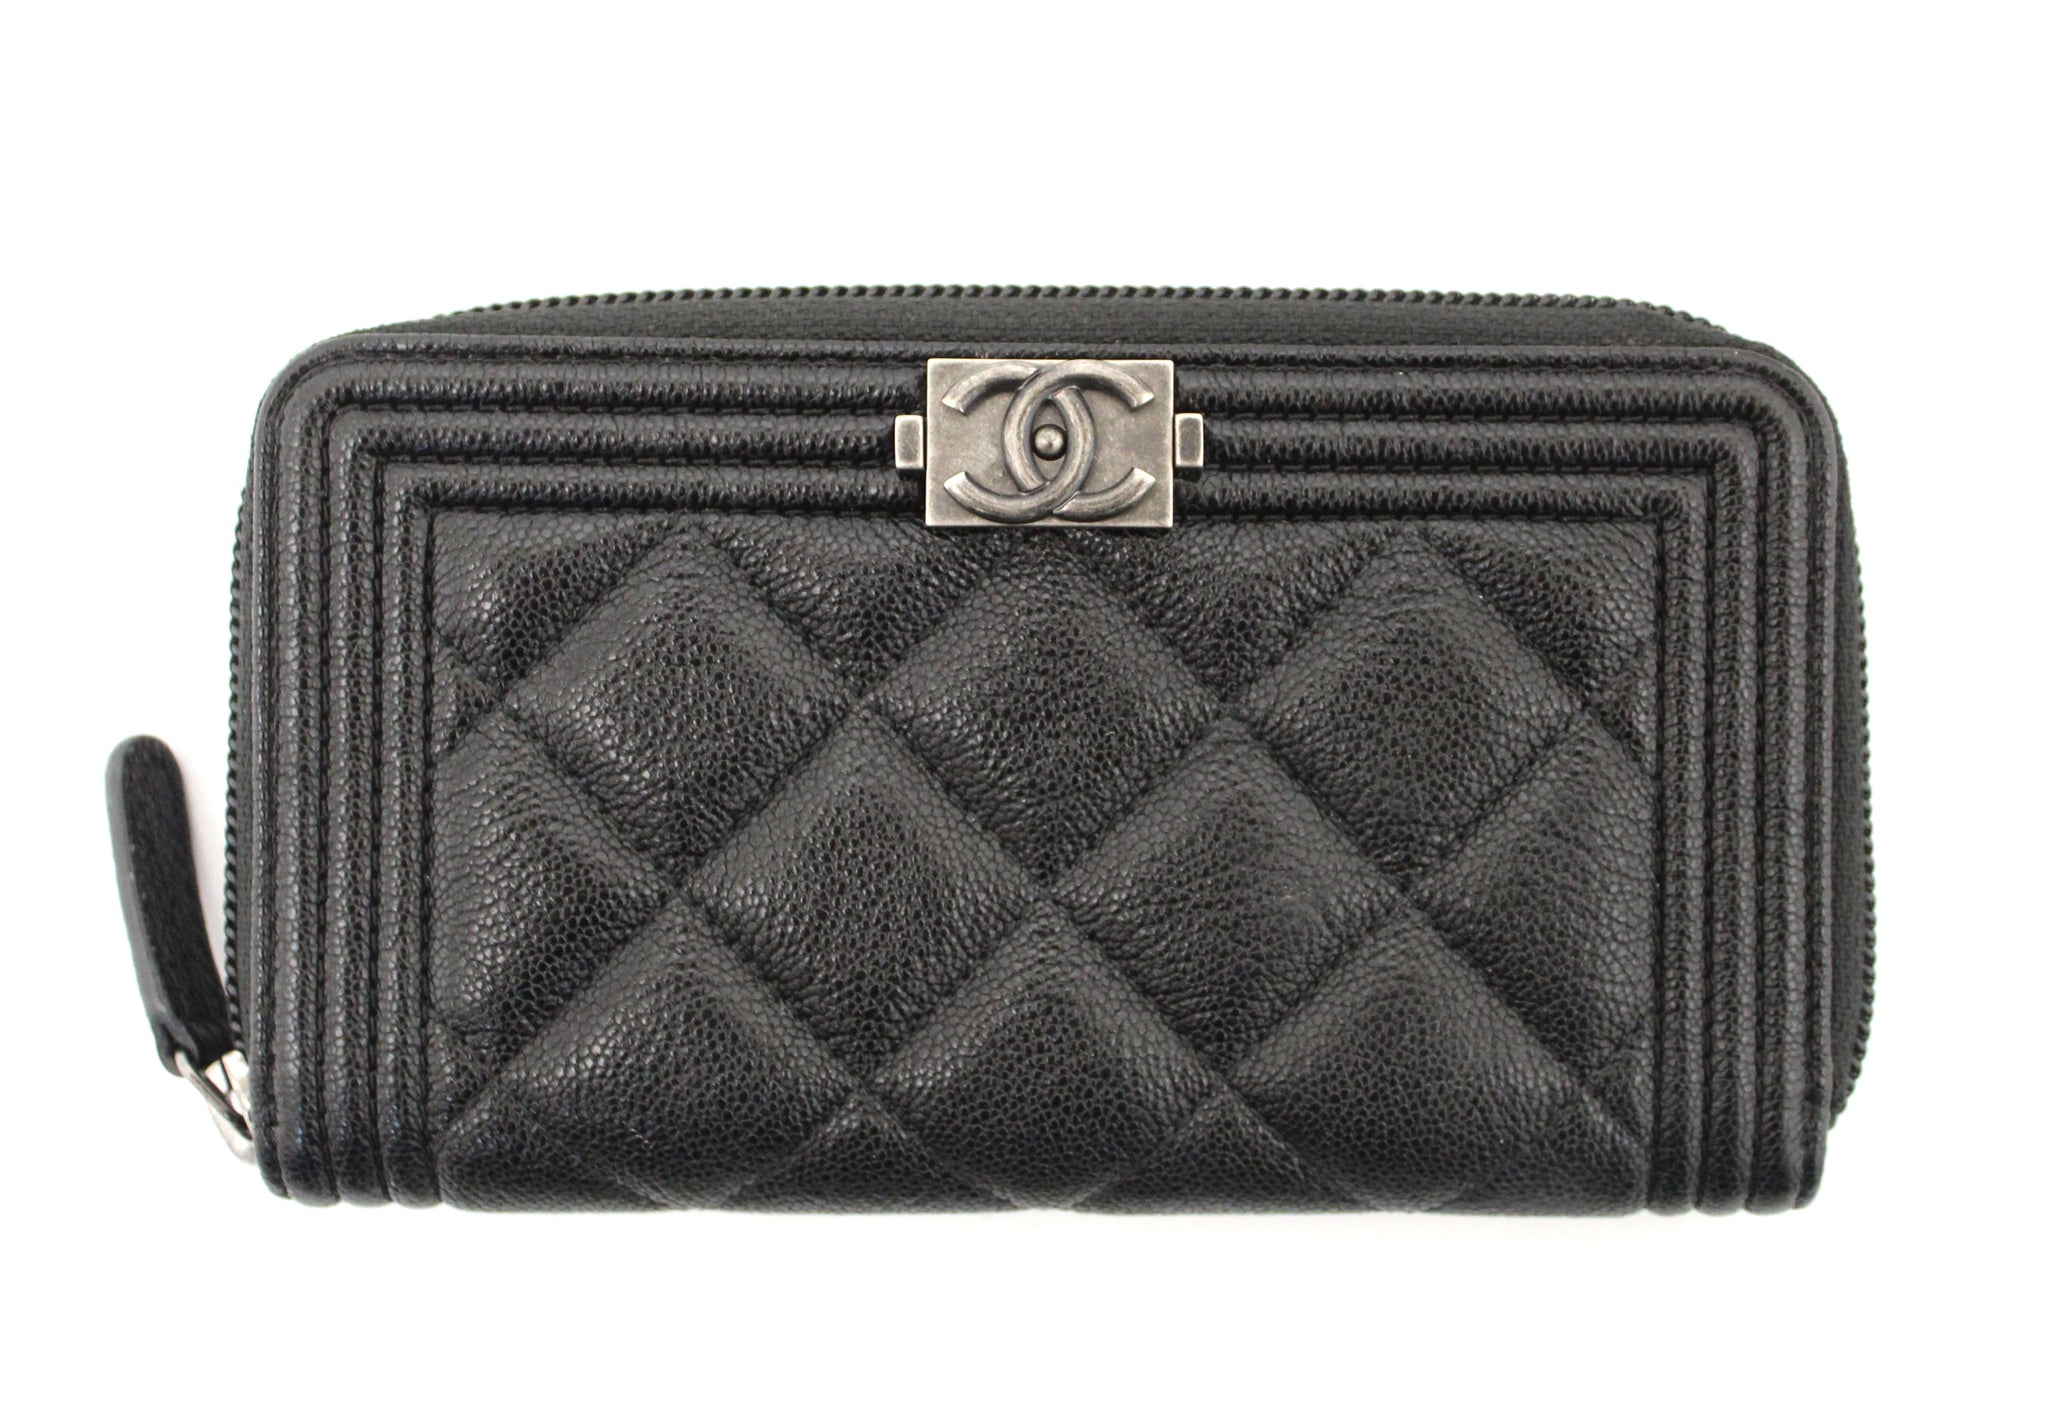 NEW Chanel Black Quilted Caviar Leather Boy Small Zip Around